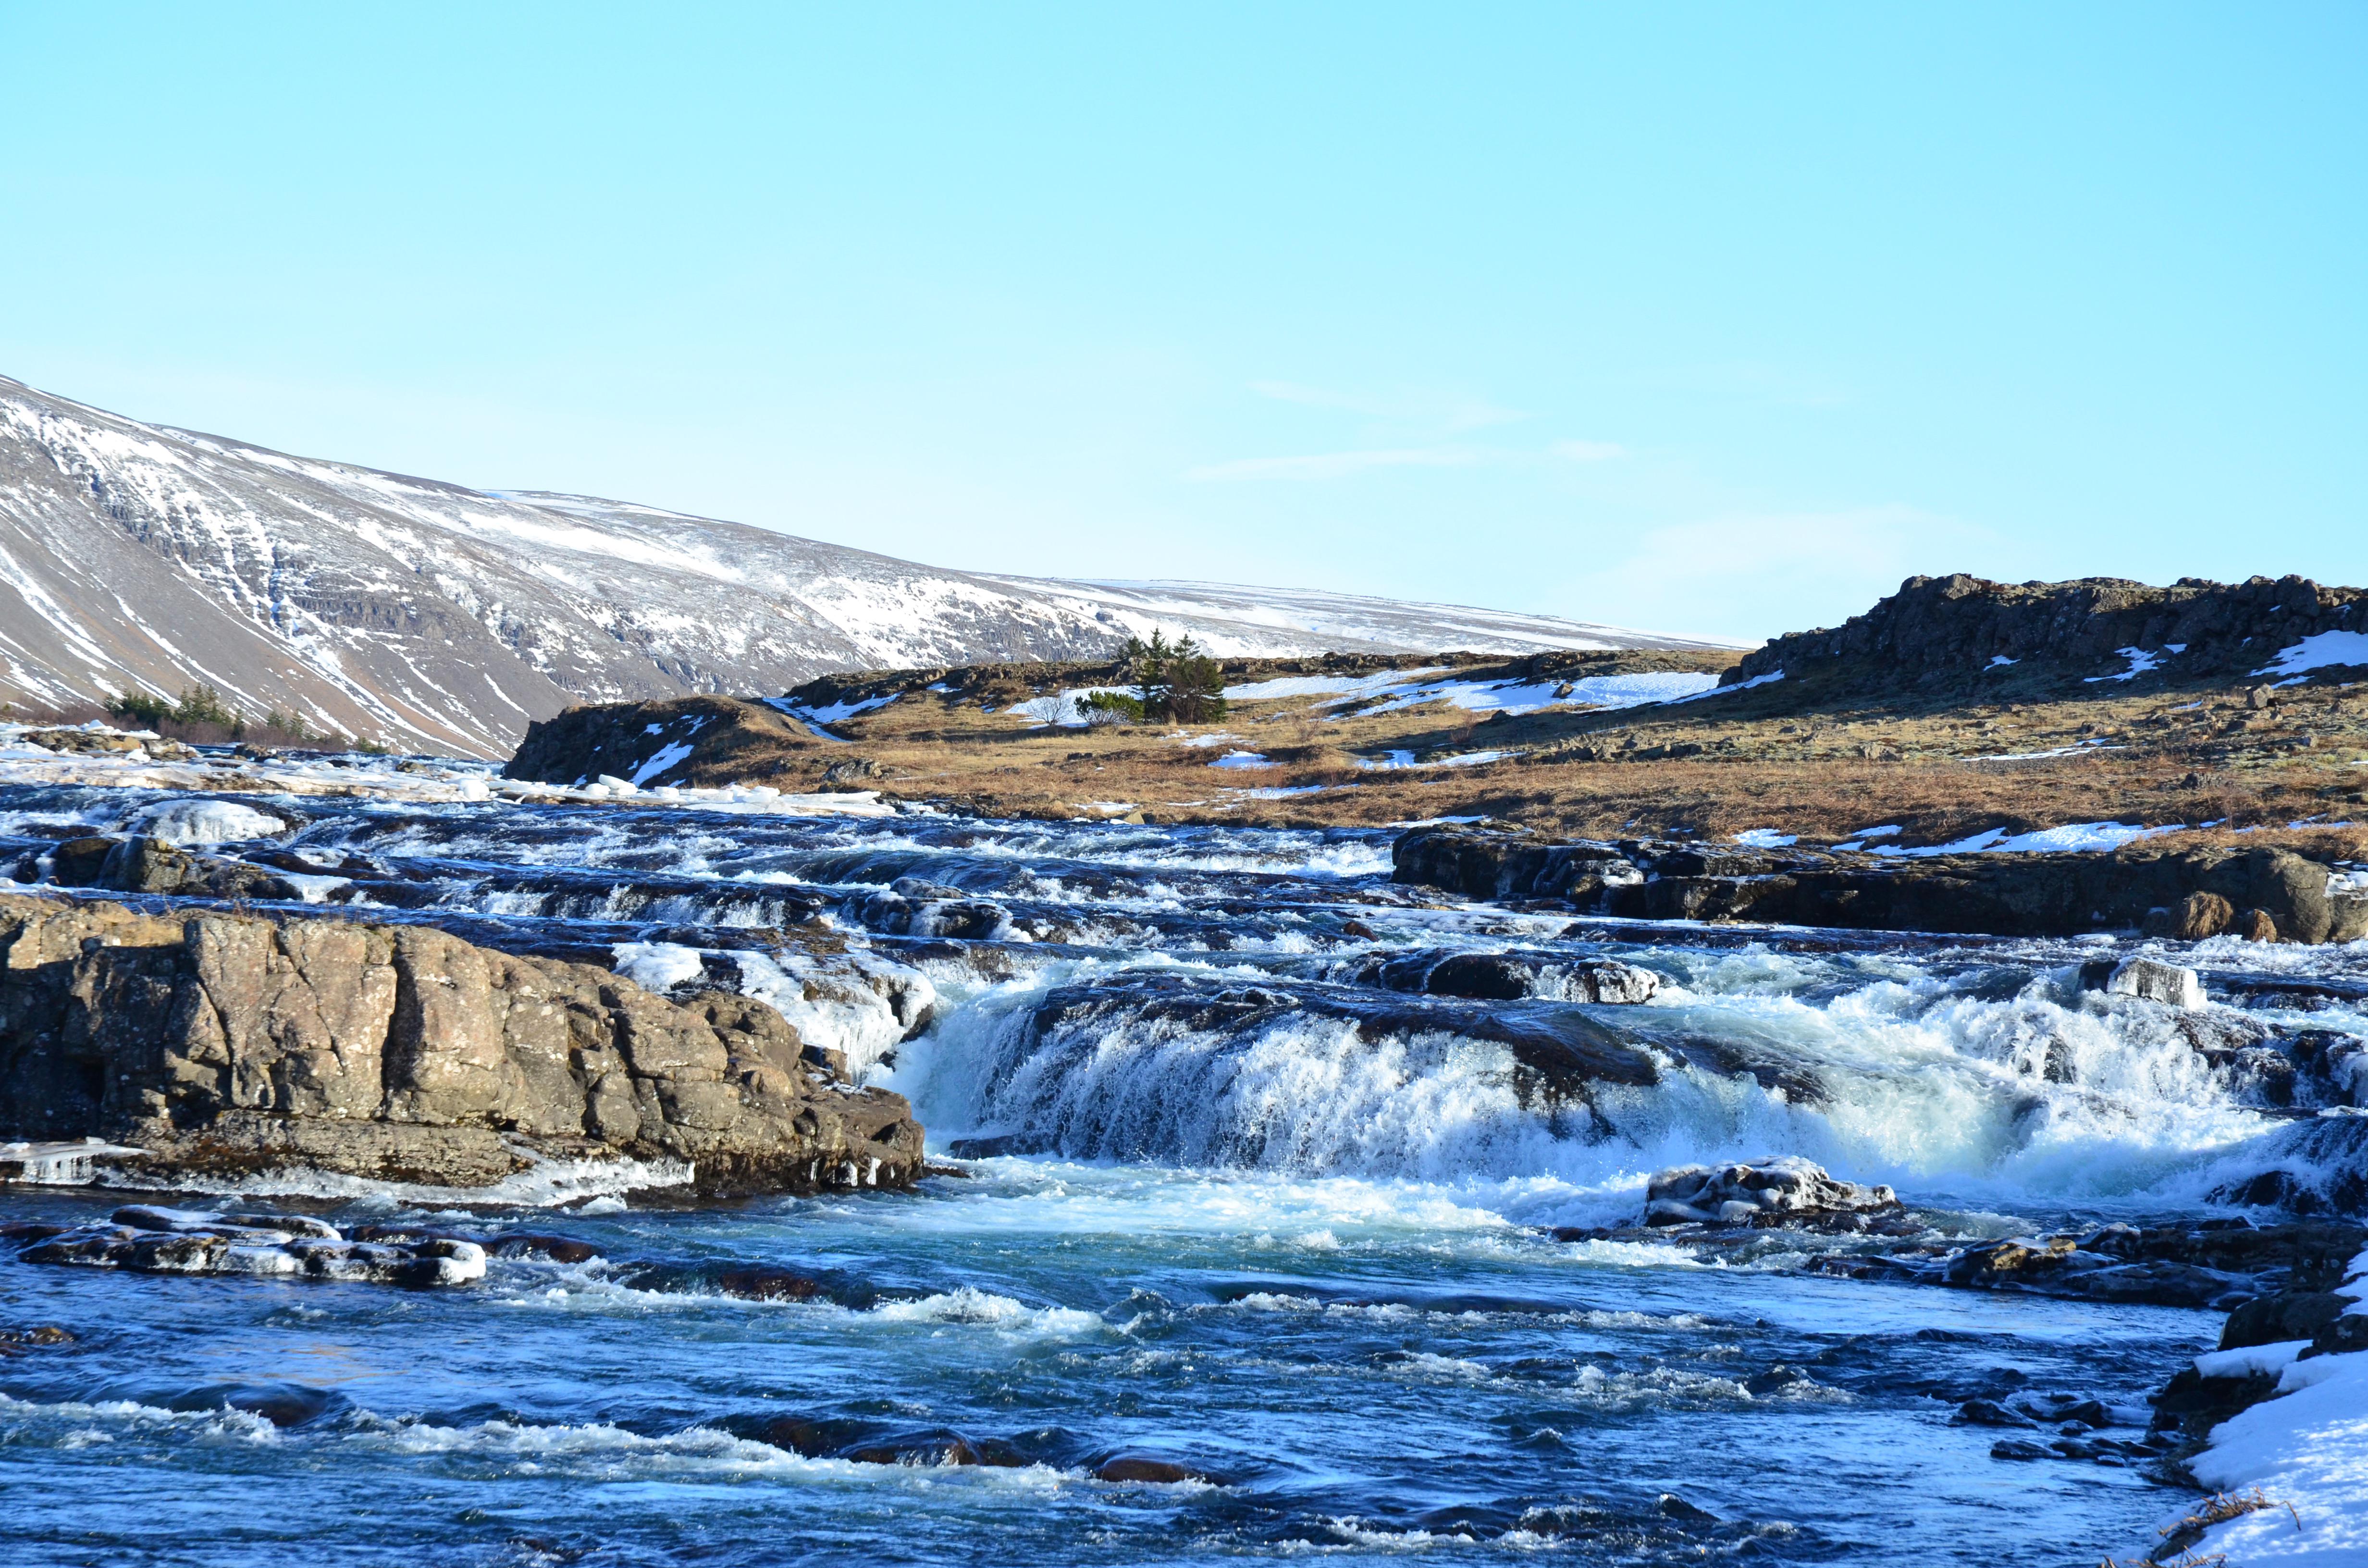 General 4928x3264 landscape Iceland nature waterfall snow winter tundra water